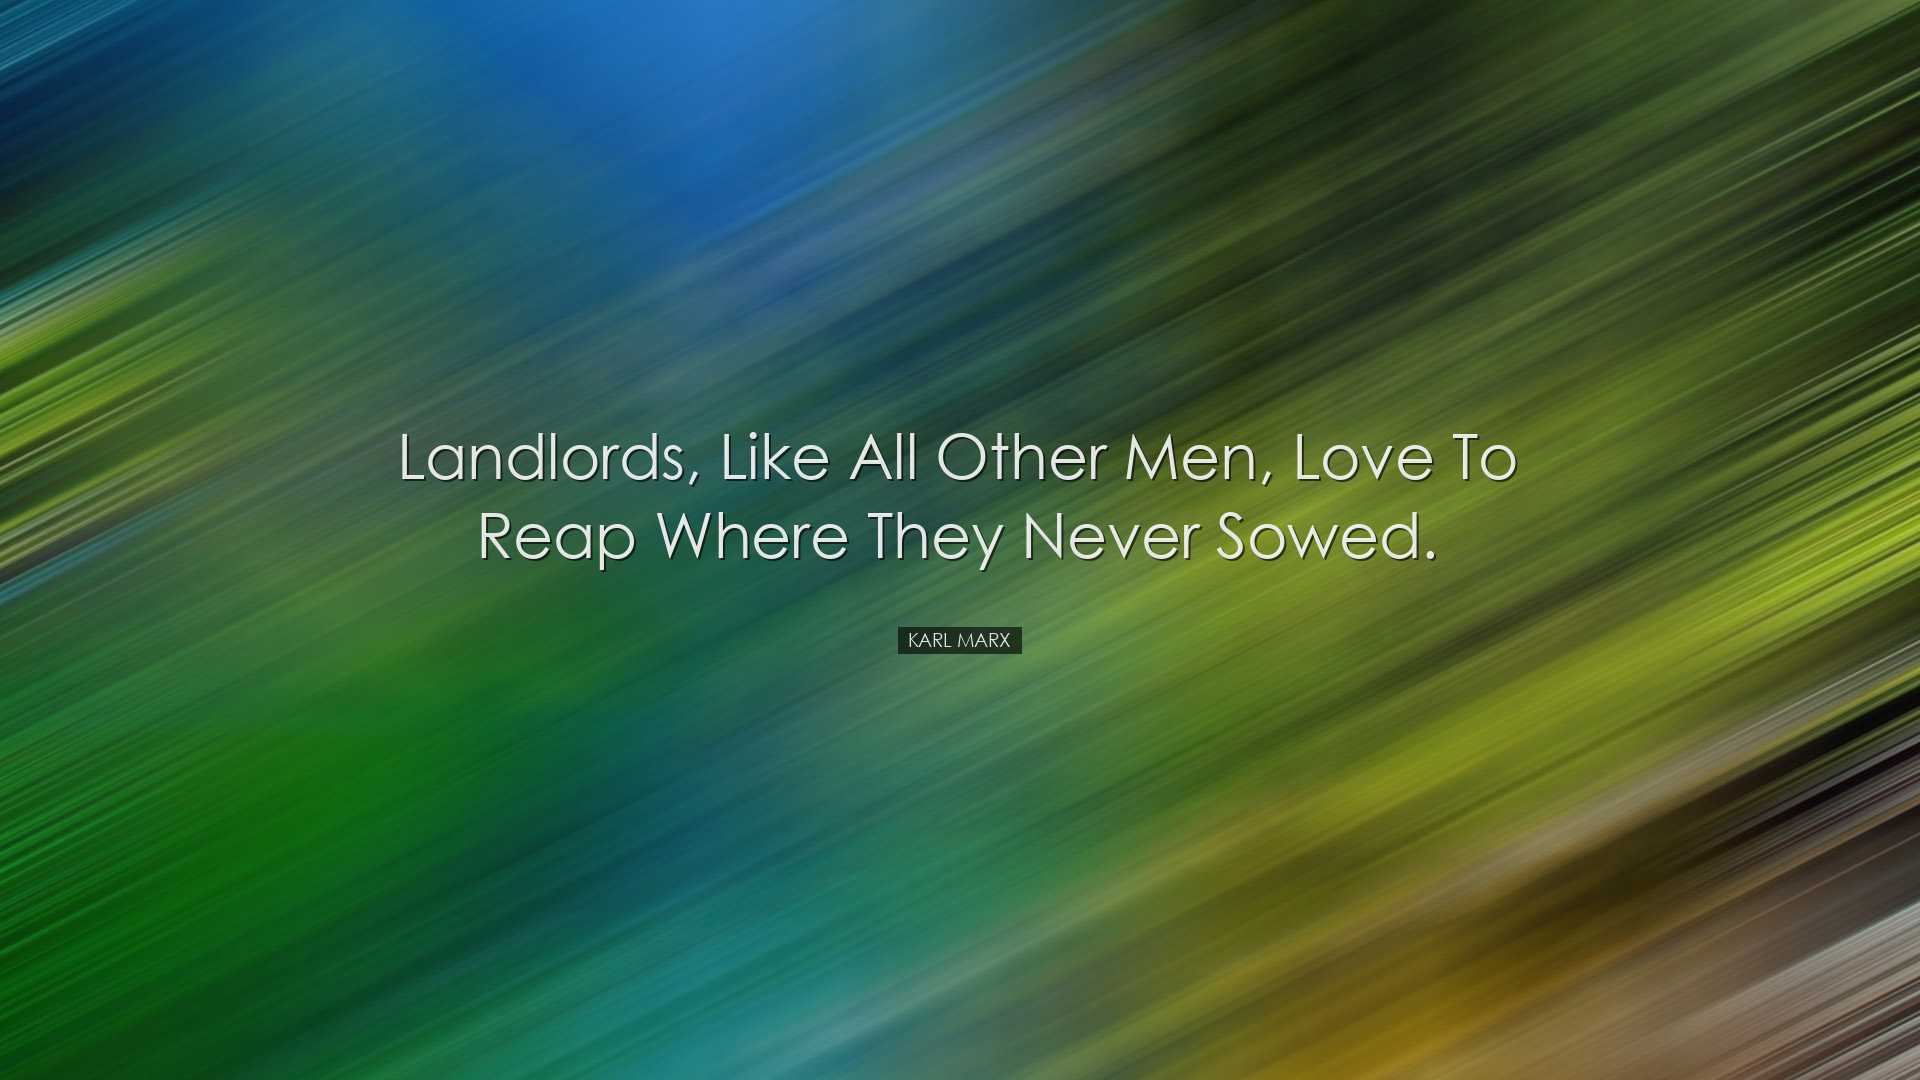 Landlords, like all other men, love to reap where they never sowed